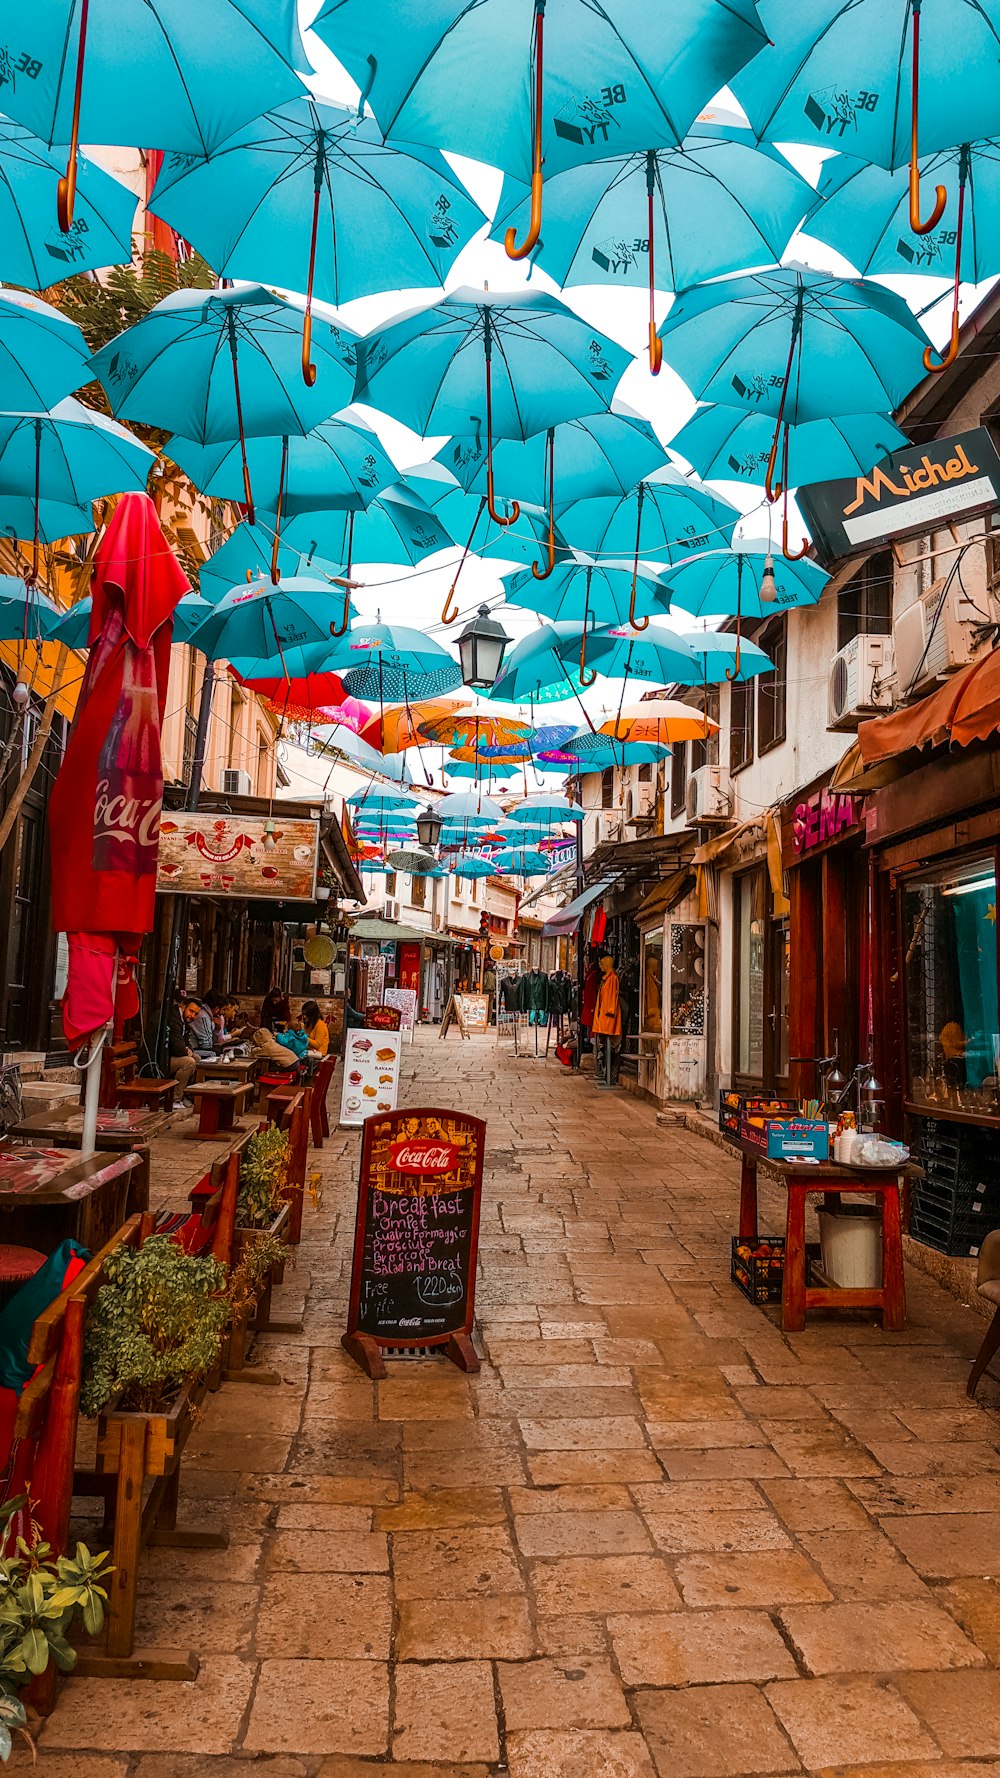 view photography of blue umbrellas in stores